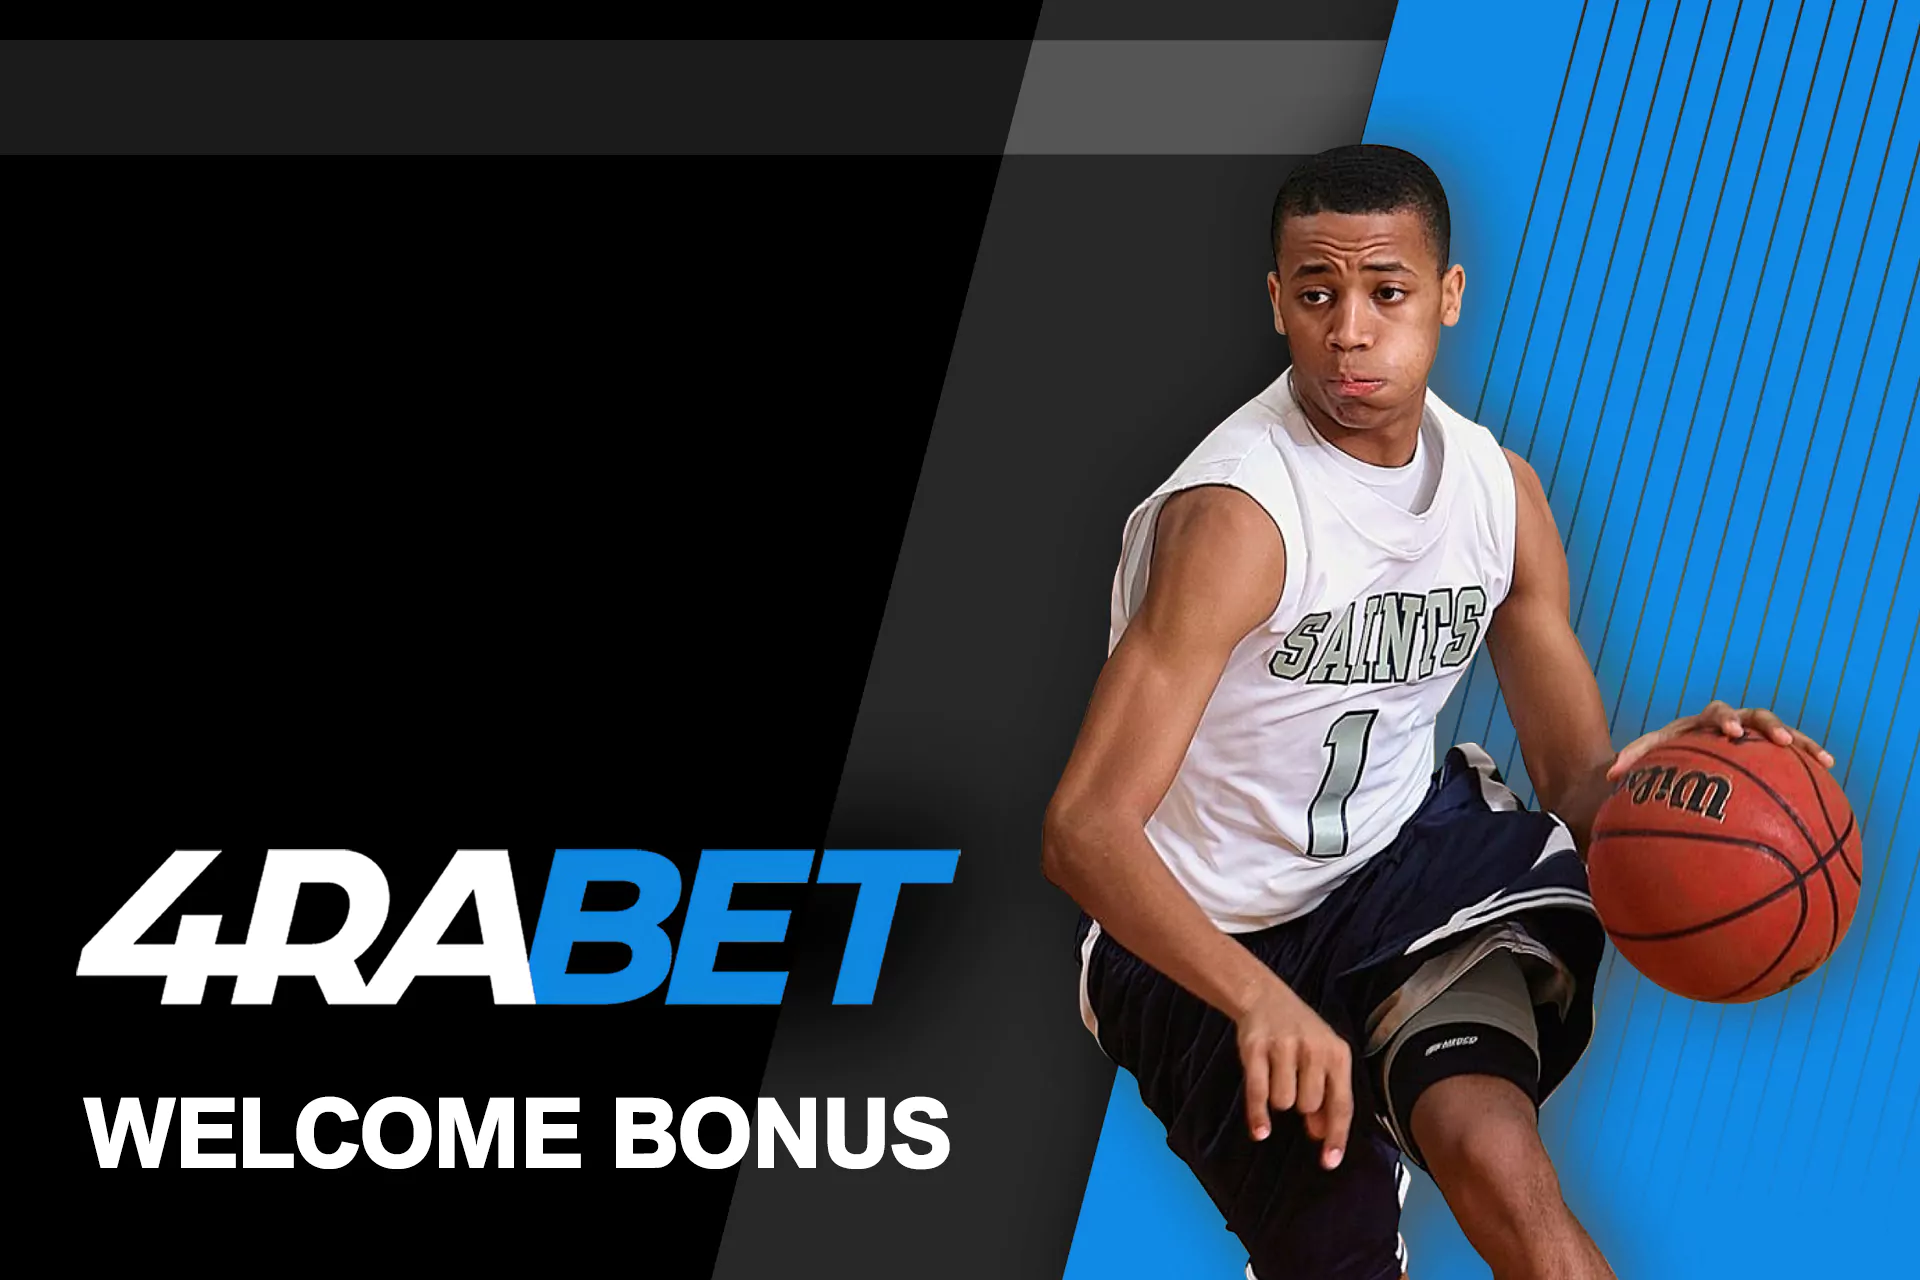 If you are a new user at 4rabet, you can claim a welcome bonus for betting or playing casino games.